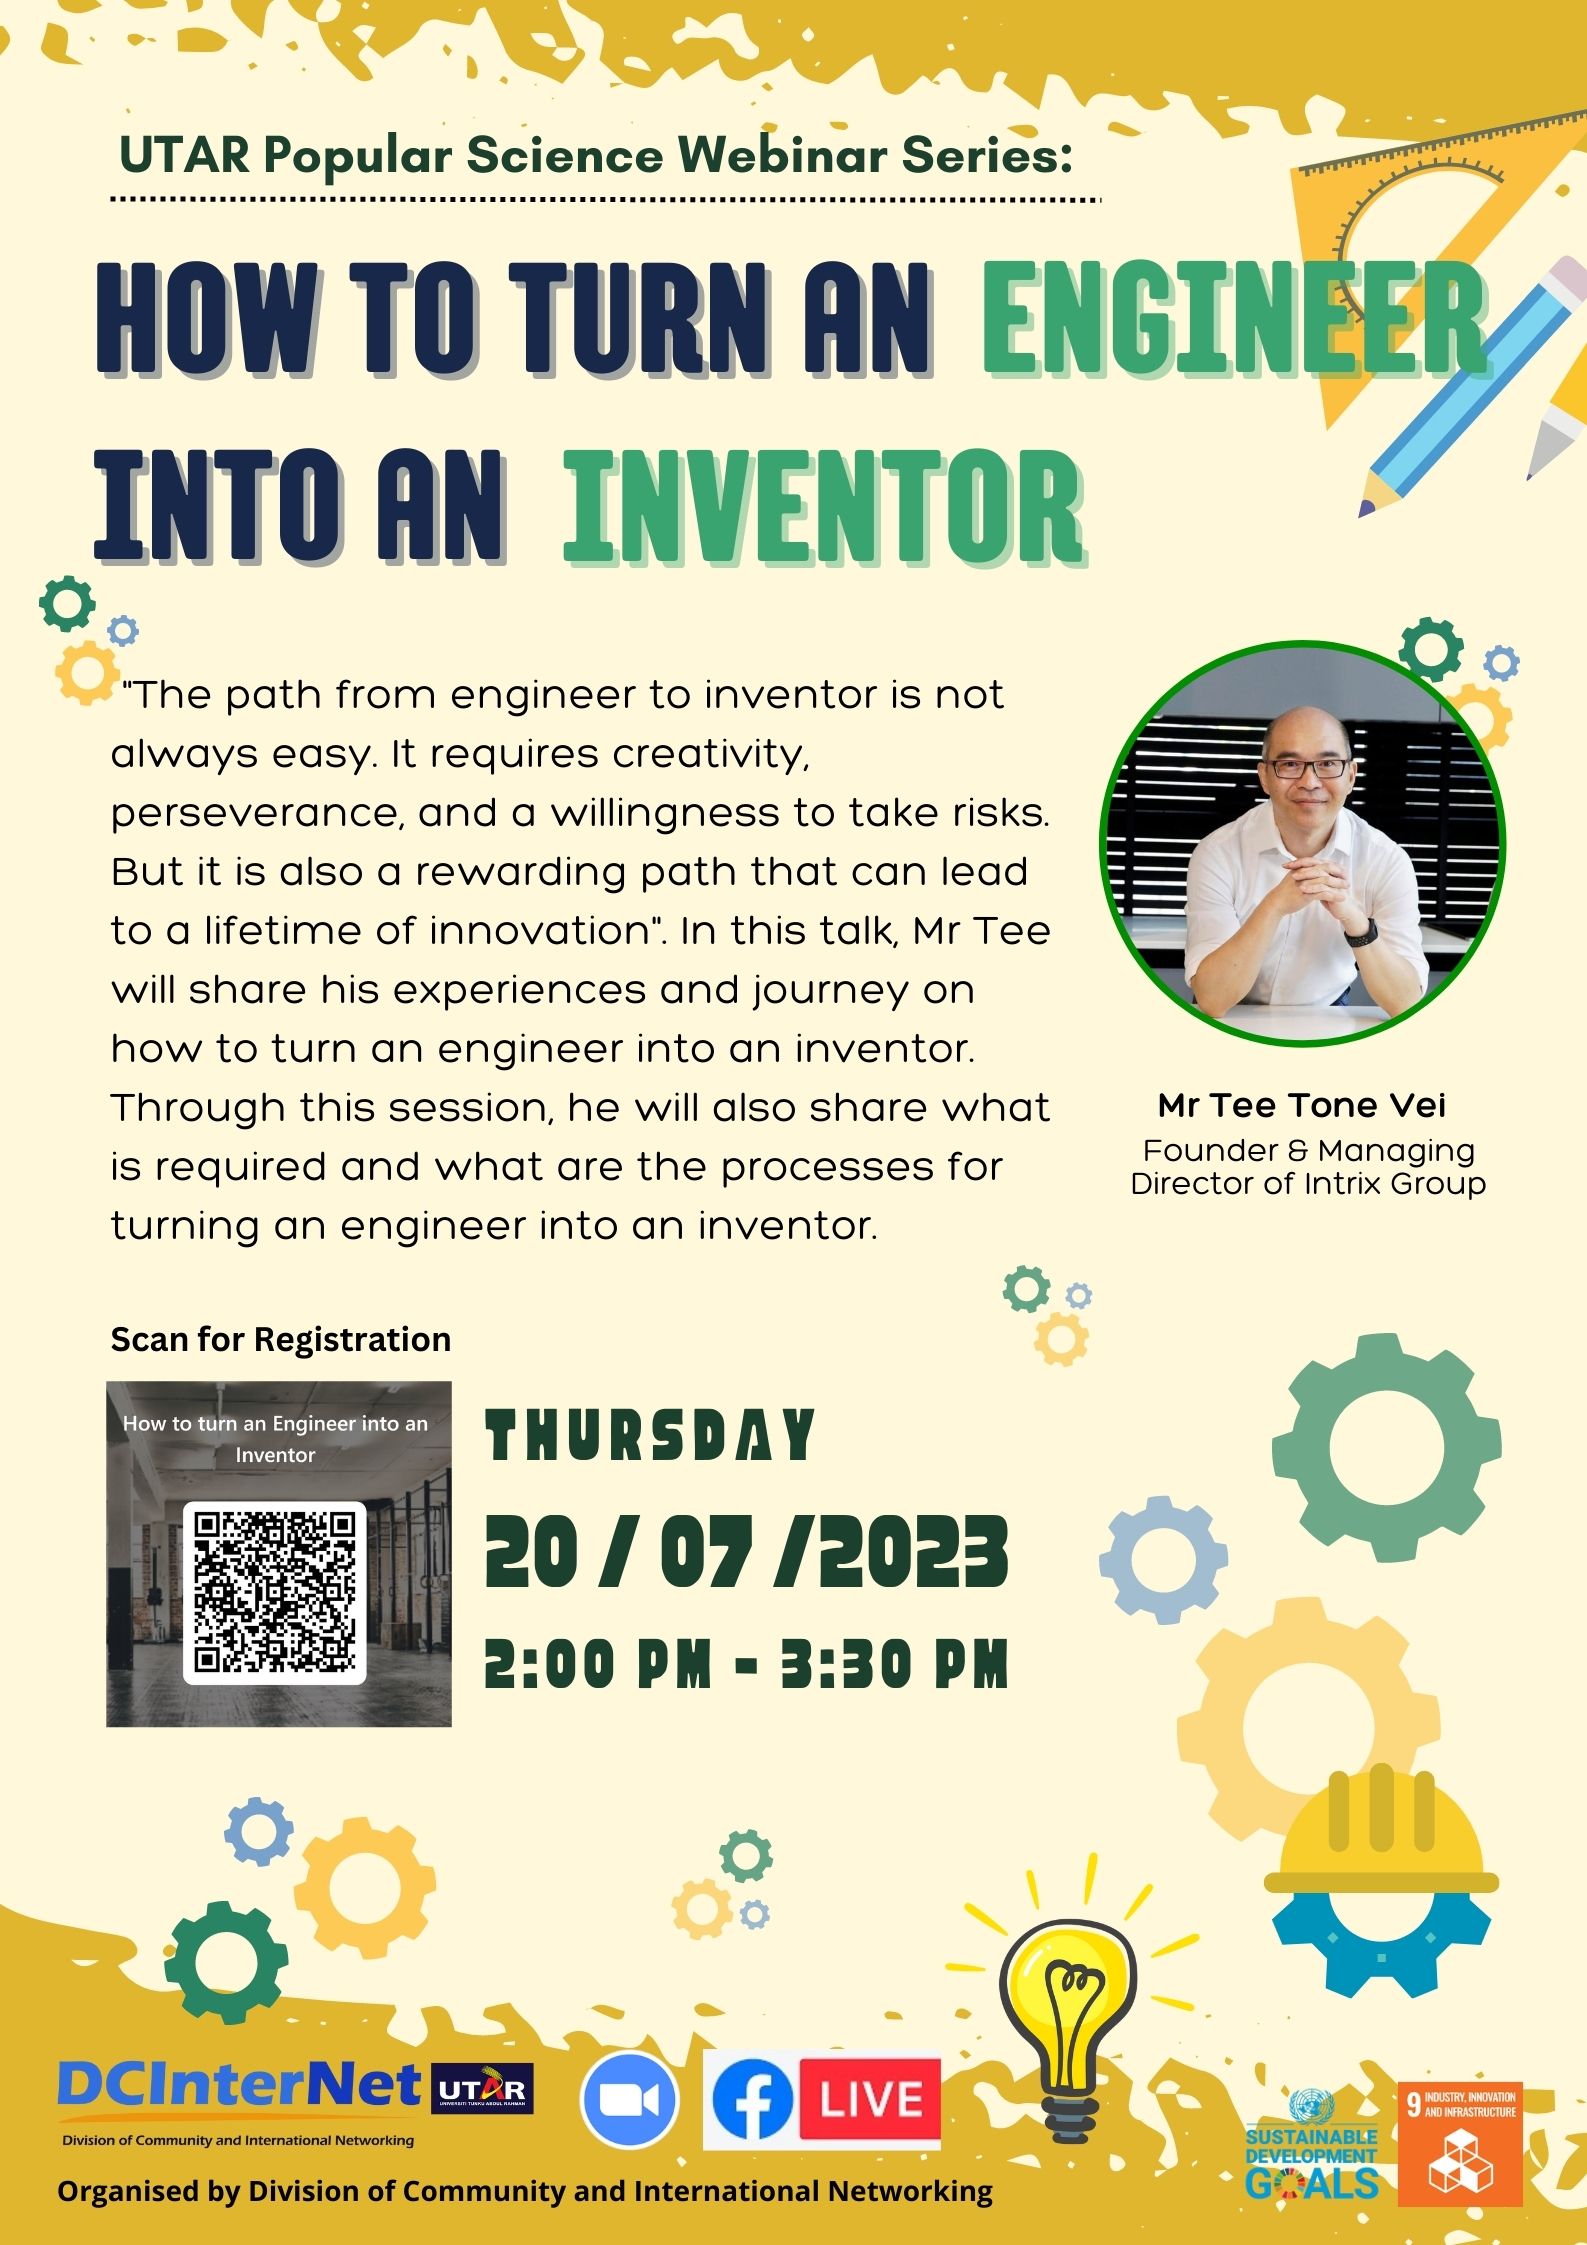 UTAR Popular Science Series: How to turn an Engineer into an Inventor?